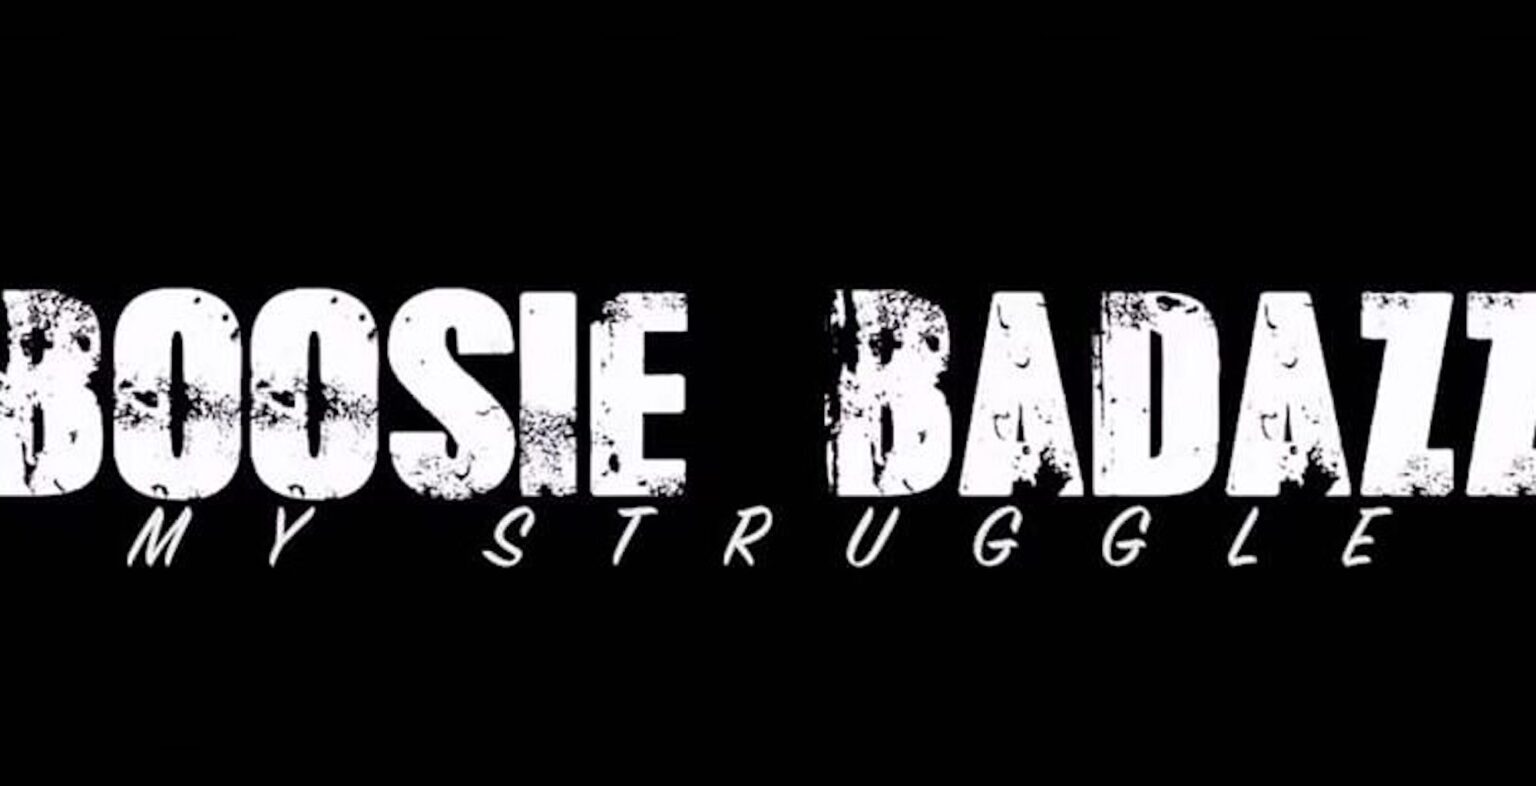 Curious about the upcoming Boosie Badazz movie 'My Struggle'? Get the details on the project and learn where you can stream it.